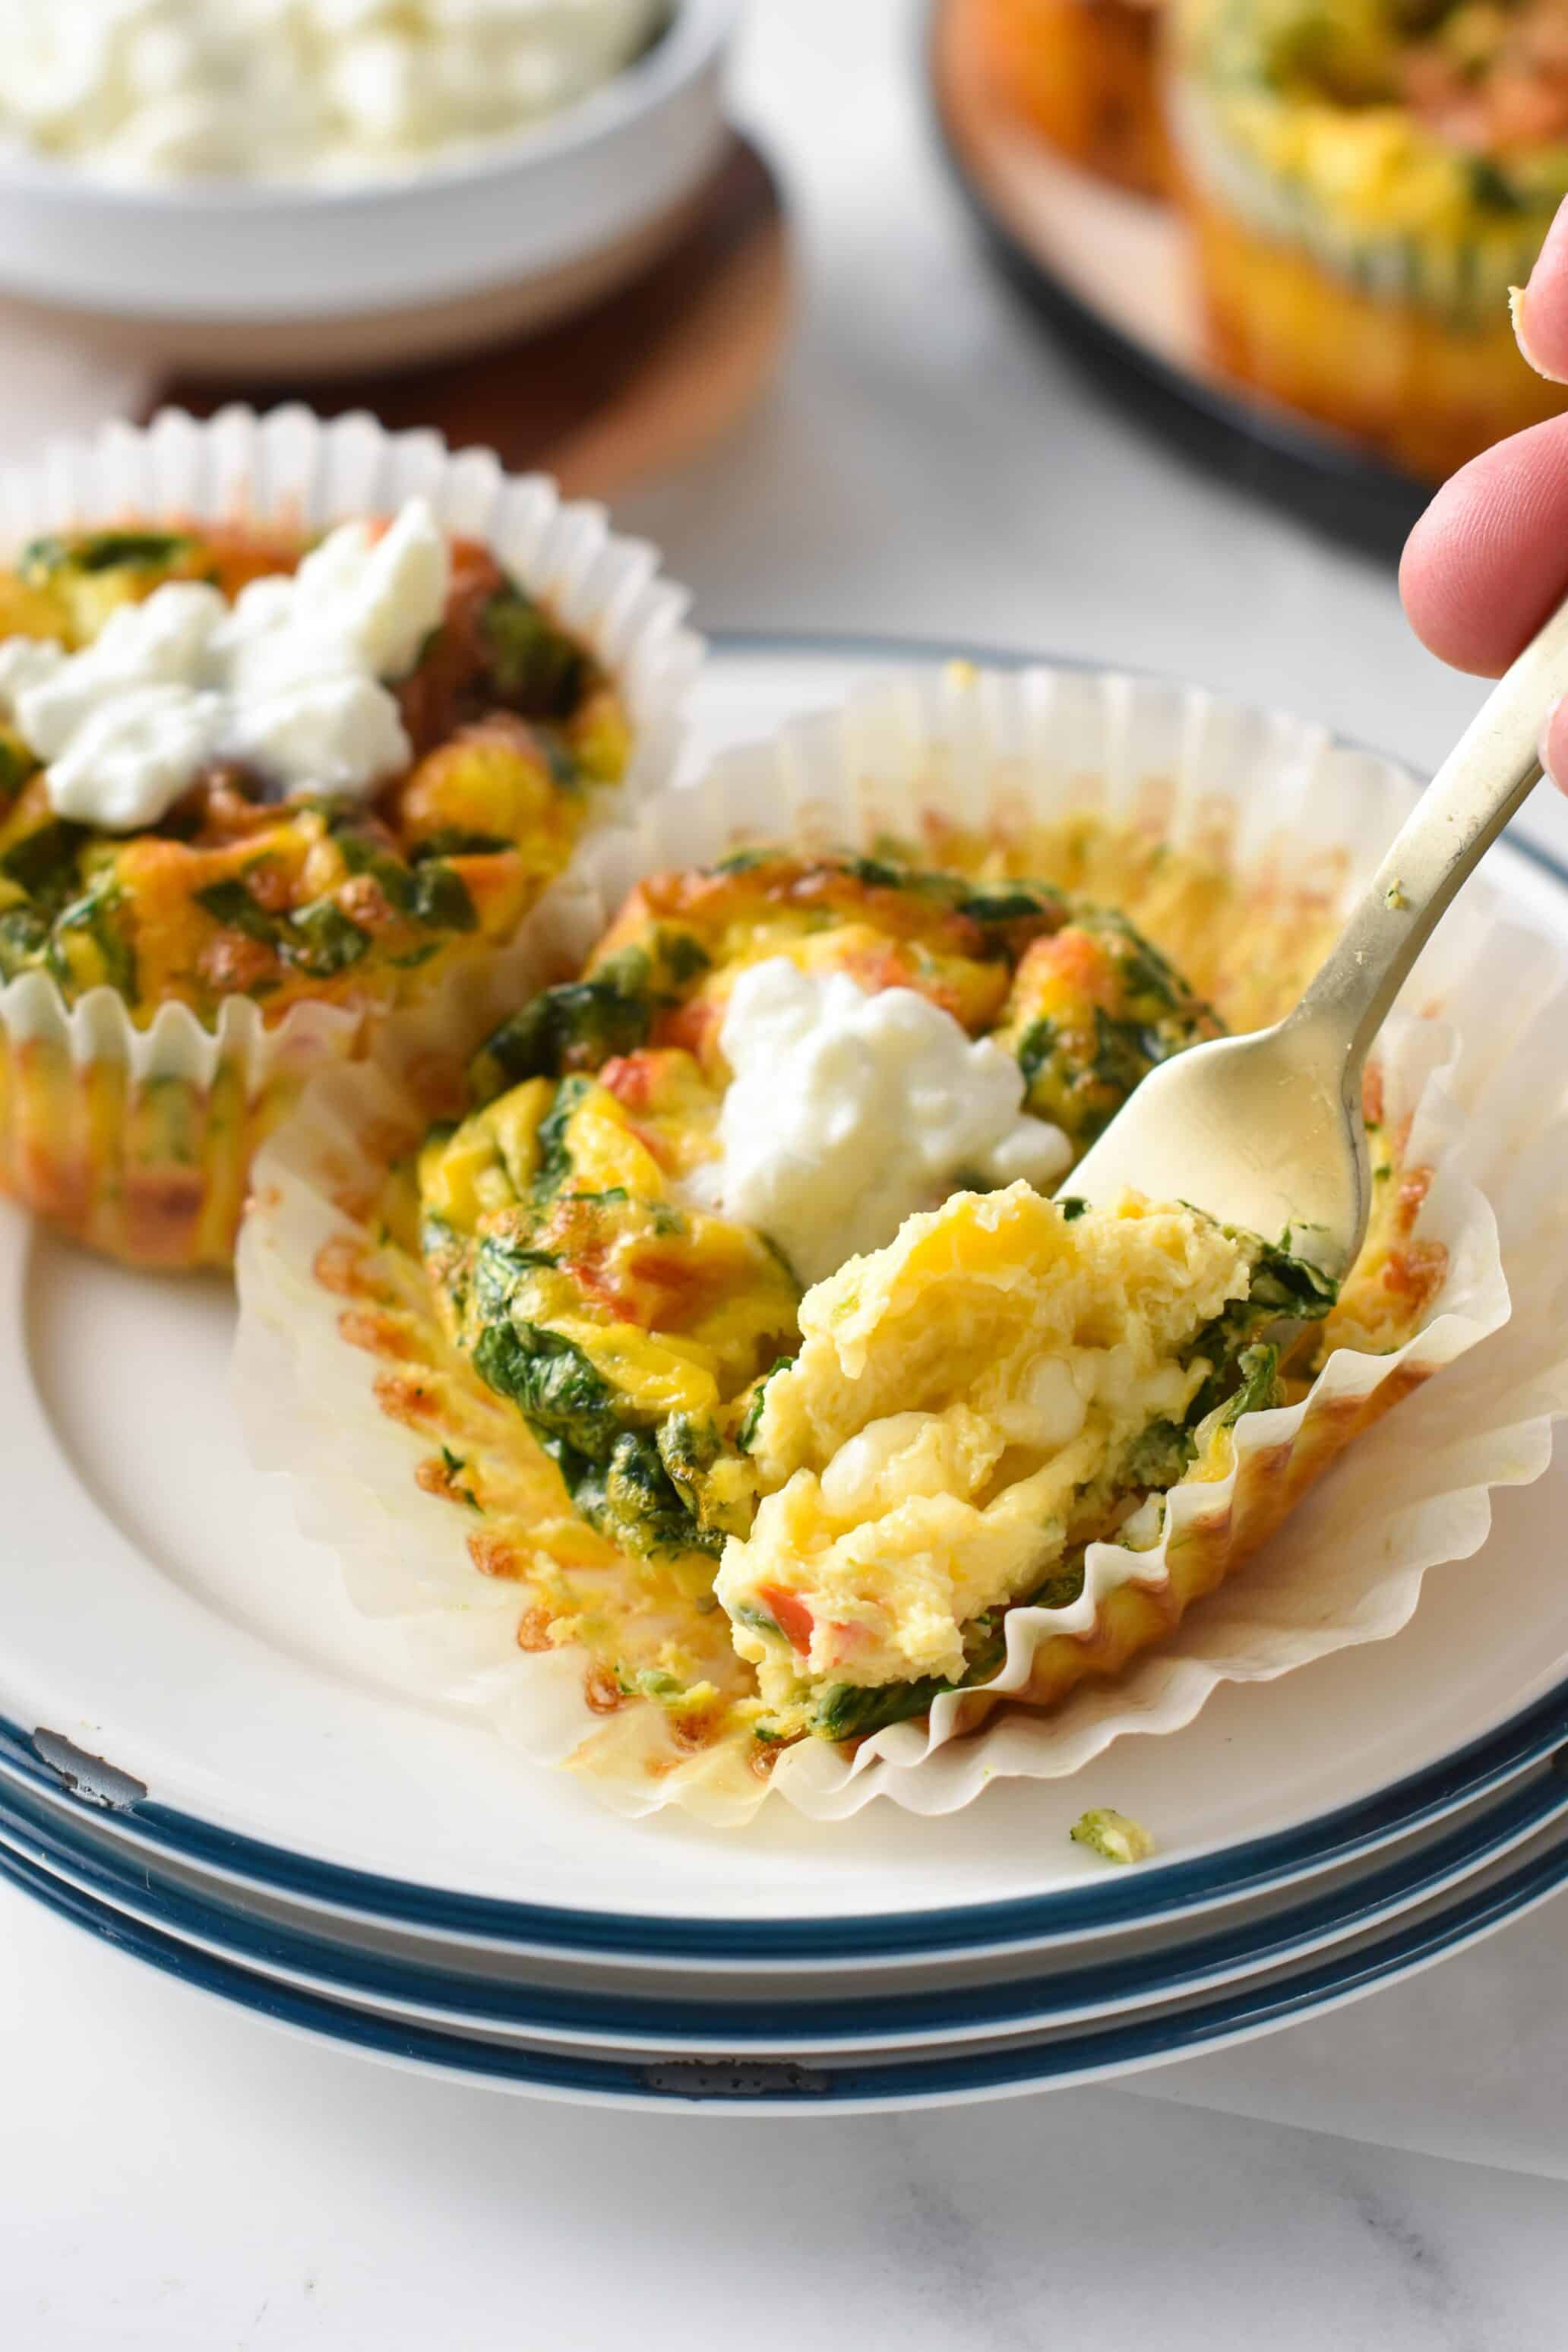 These Cottage Cheese Egg Bites are easy, high-protein breakfast bites perfect for meal prep days of healthy breakfast. They are made with only a few ingredients and are easy to prepare in less than 10 minutes.